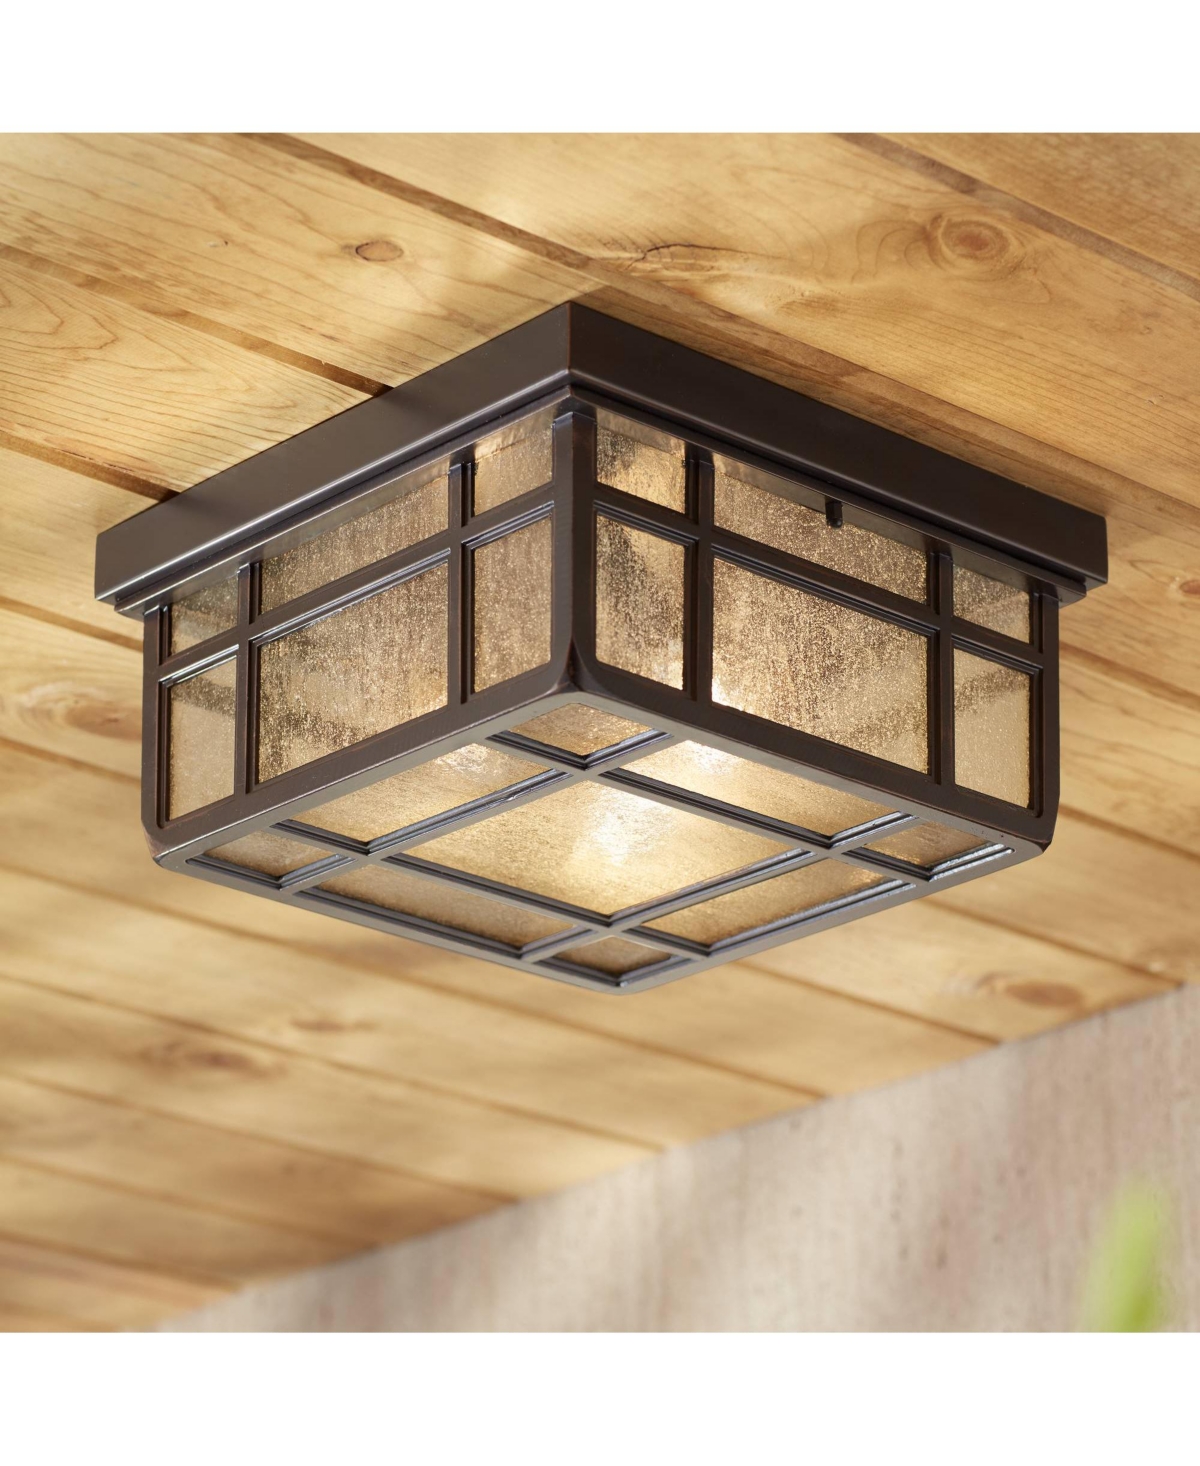 Sierra Craftsman Rustic Flush-Mount Outdoor Ceiling Light Rubbed Bronze Steel 5 1/2" Frosted Seeded Glass Panels Damp Rated for Exterior House Porch P